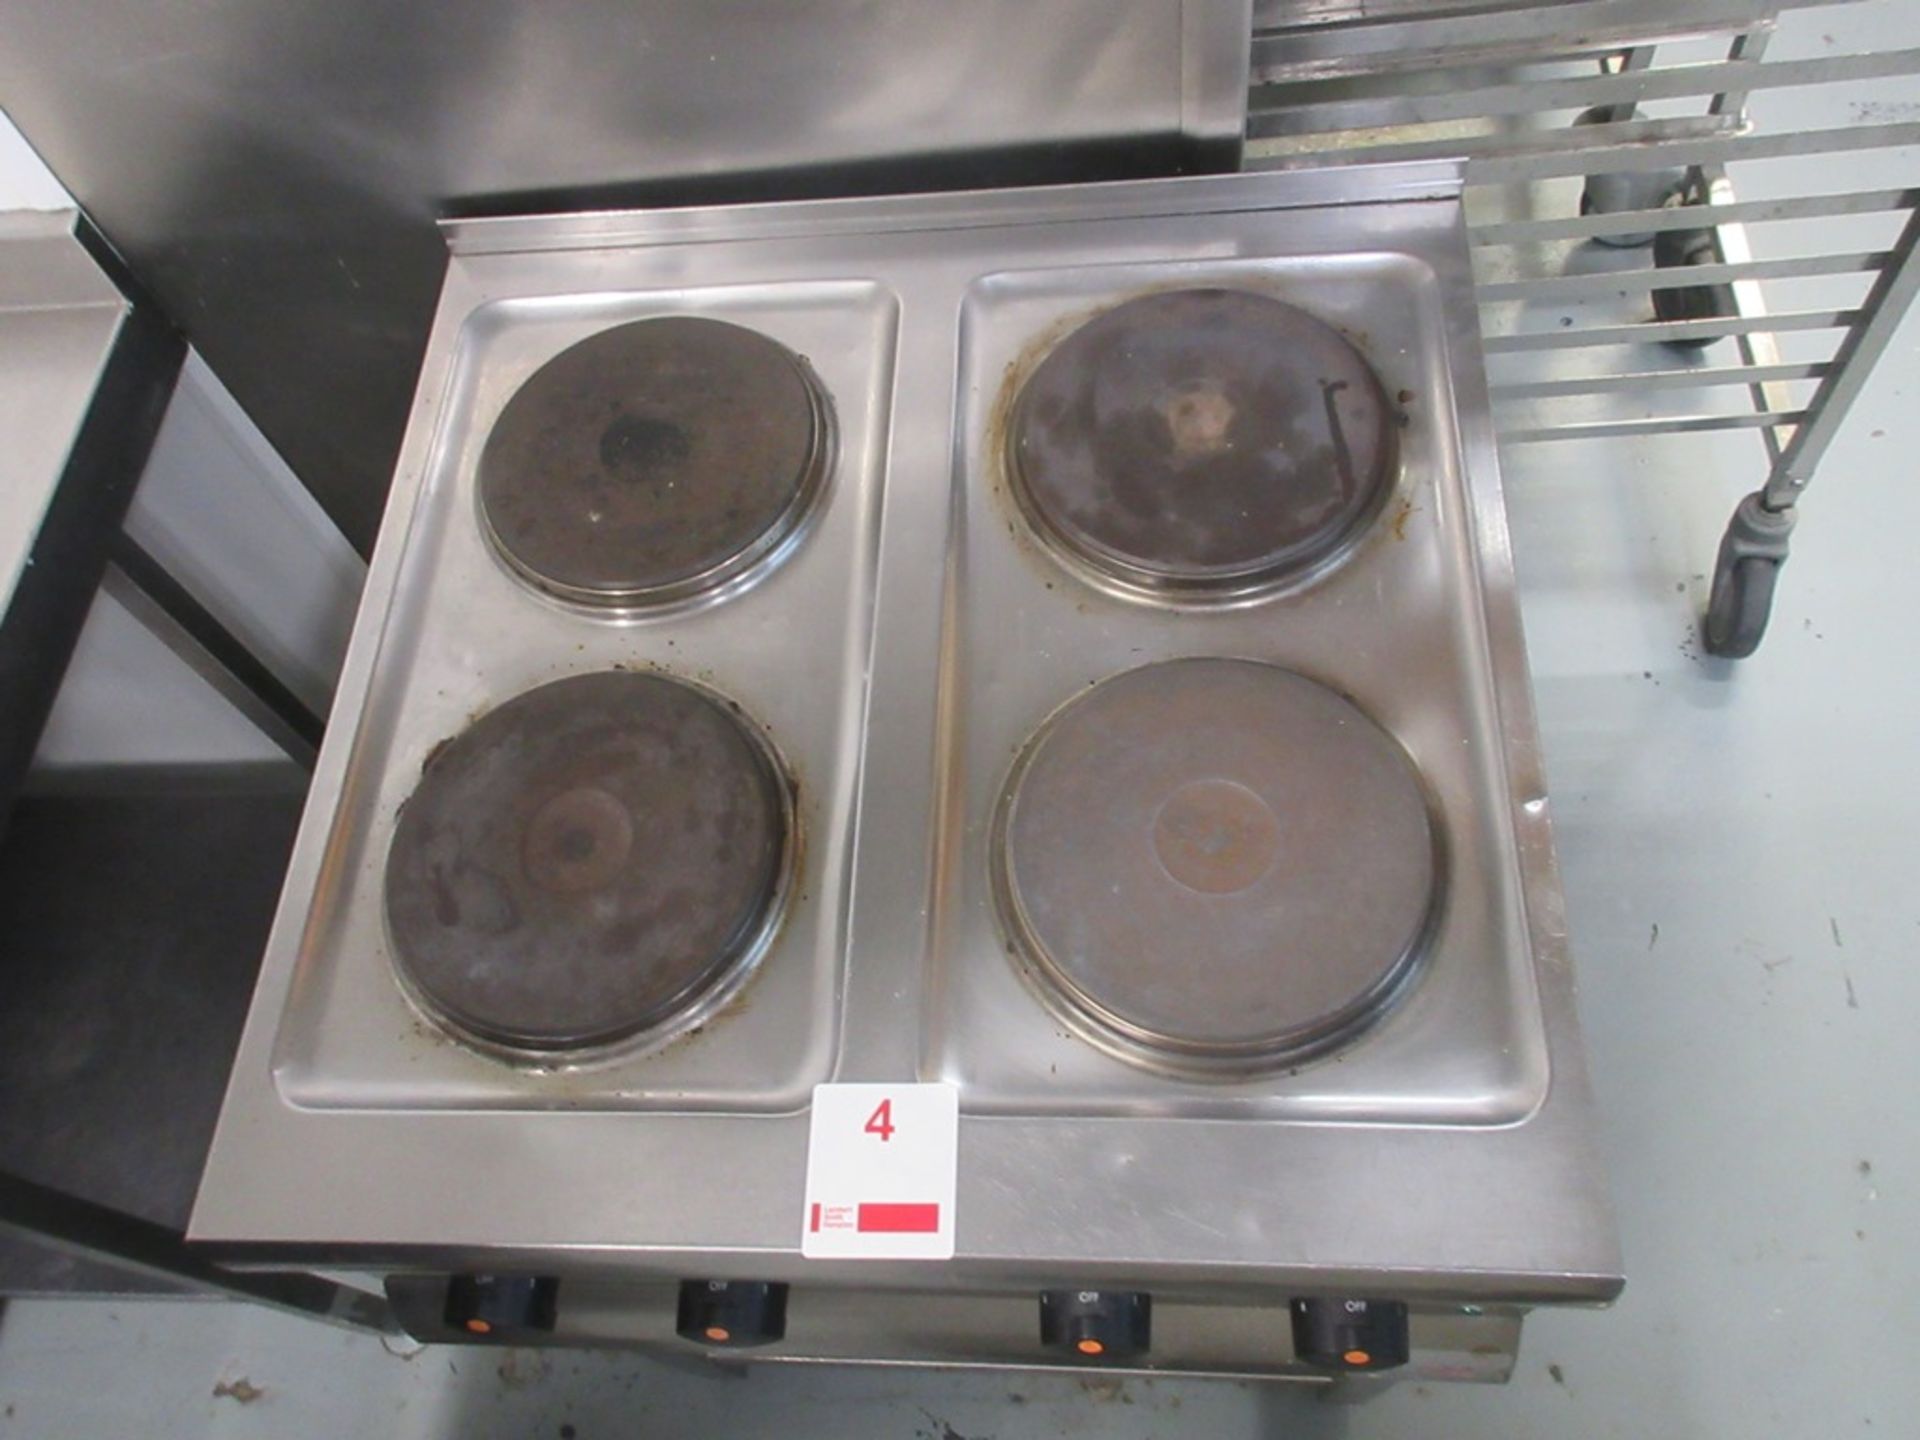 Lincat stainless steel 4 ring electric hob, Model HT6-A003, serial no. 27016630, approx. size: 600mm - Image 2 of 6